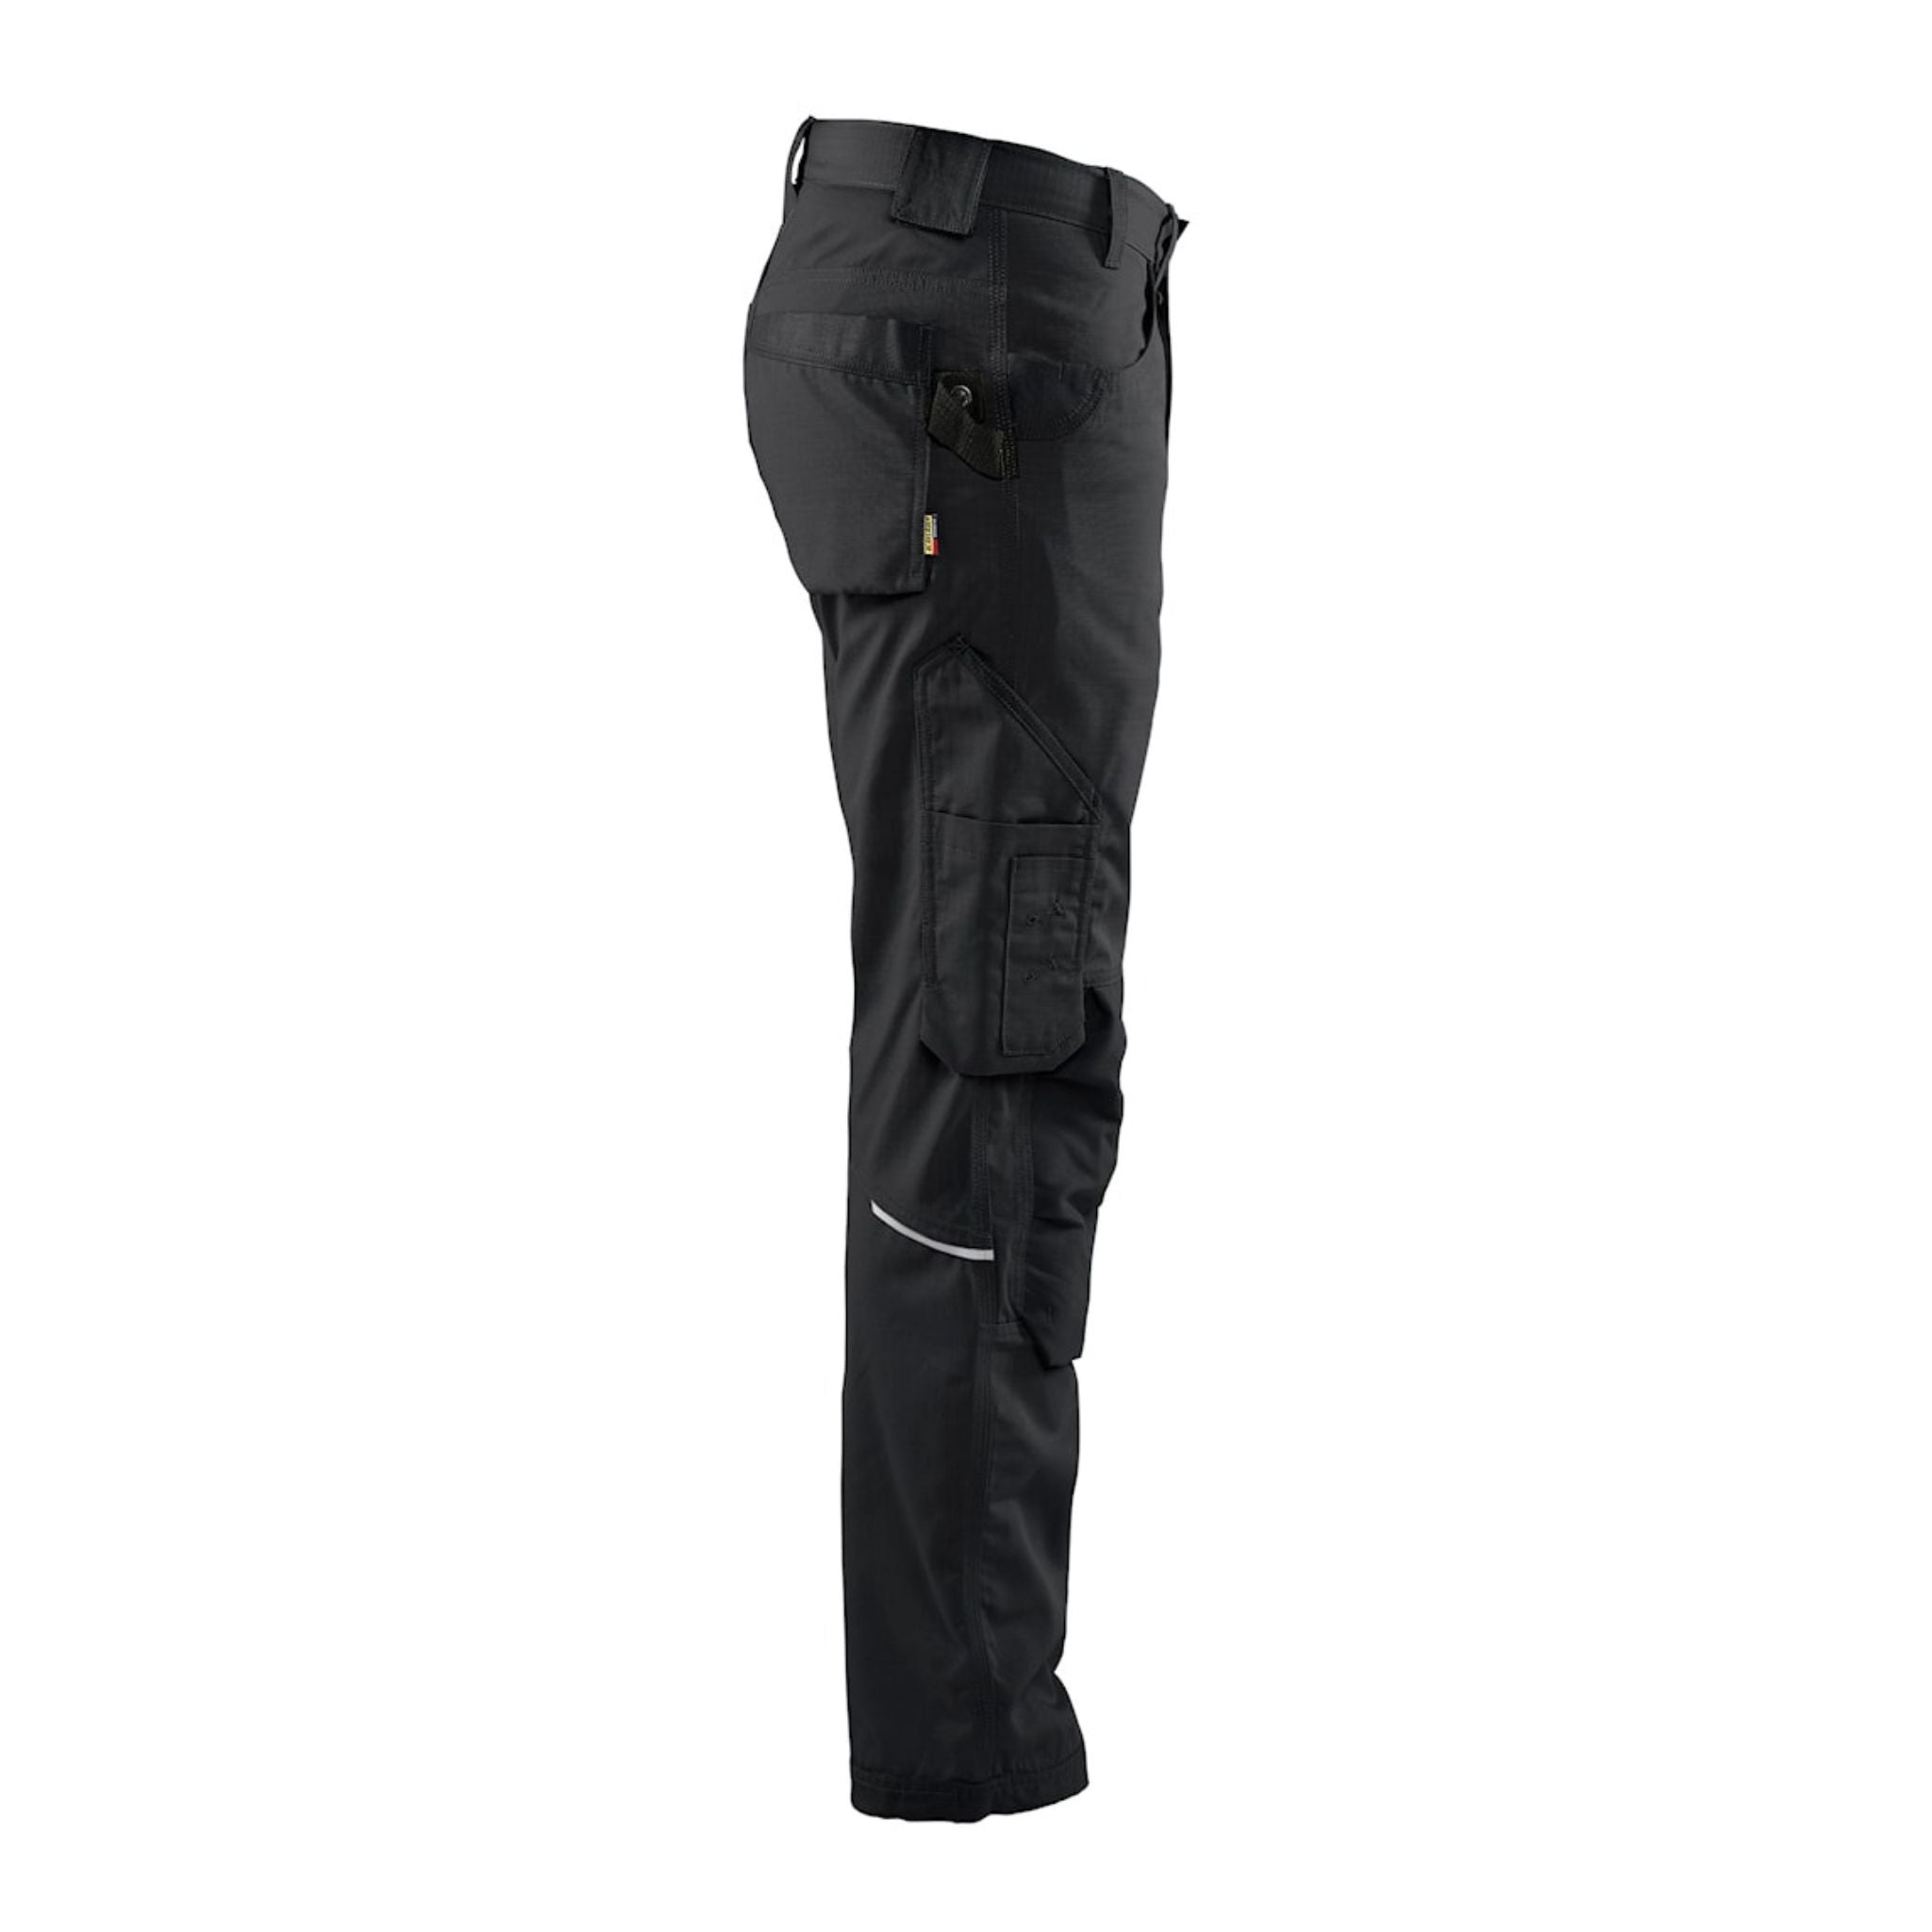 Men's show black pants with leg pockets and tool loop